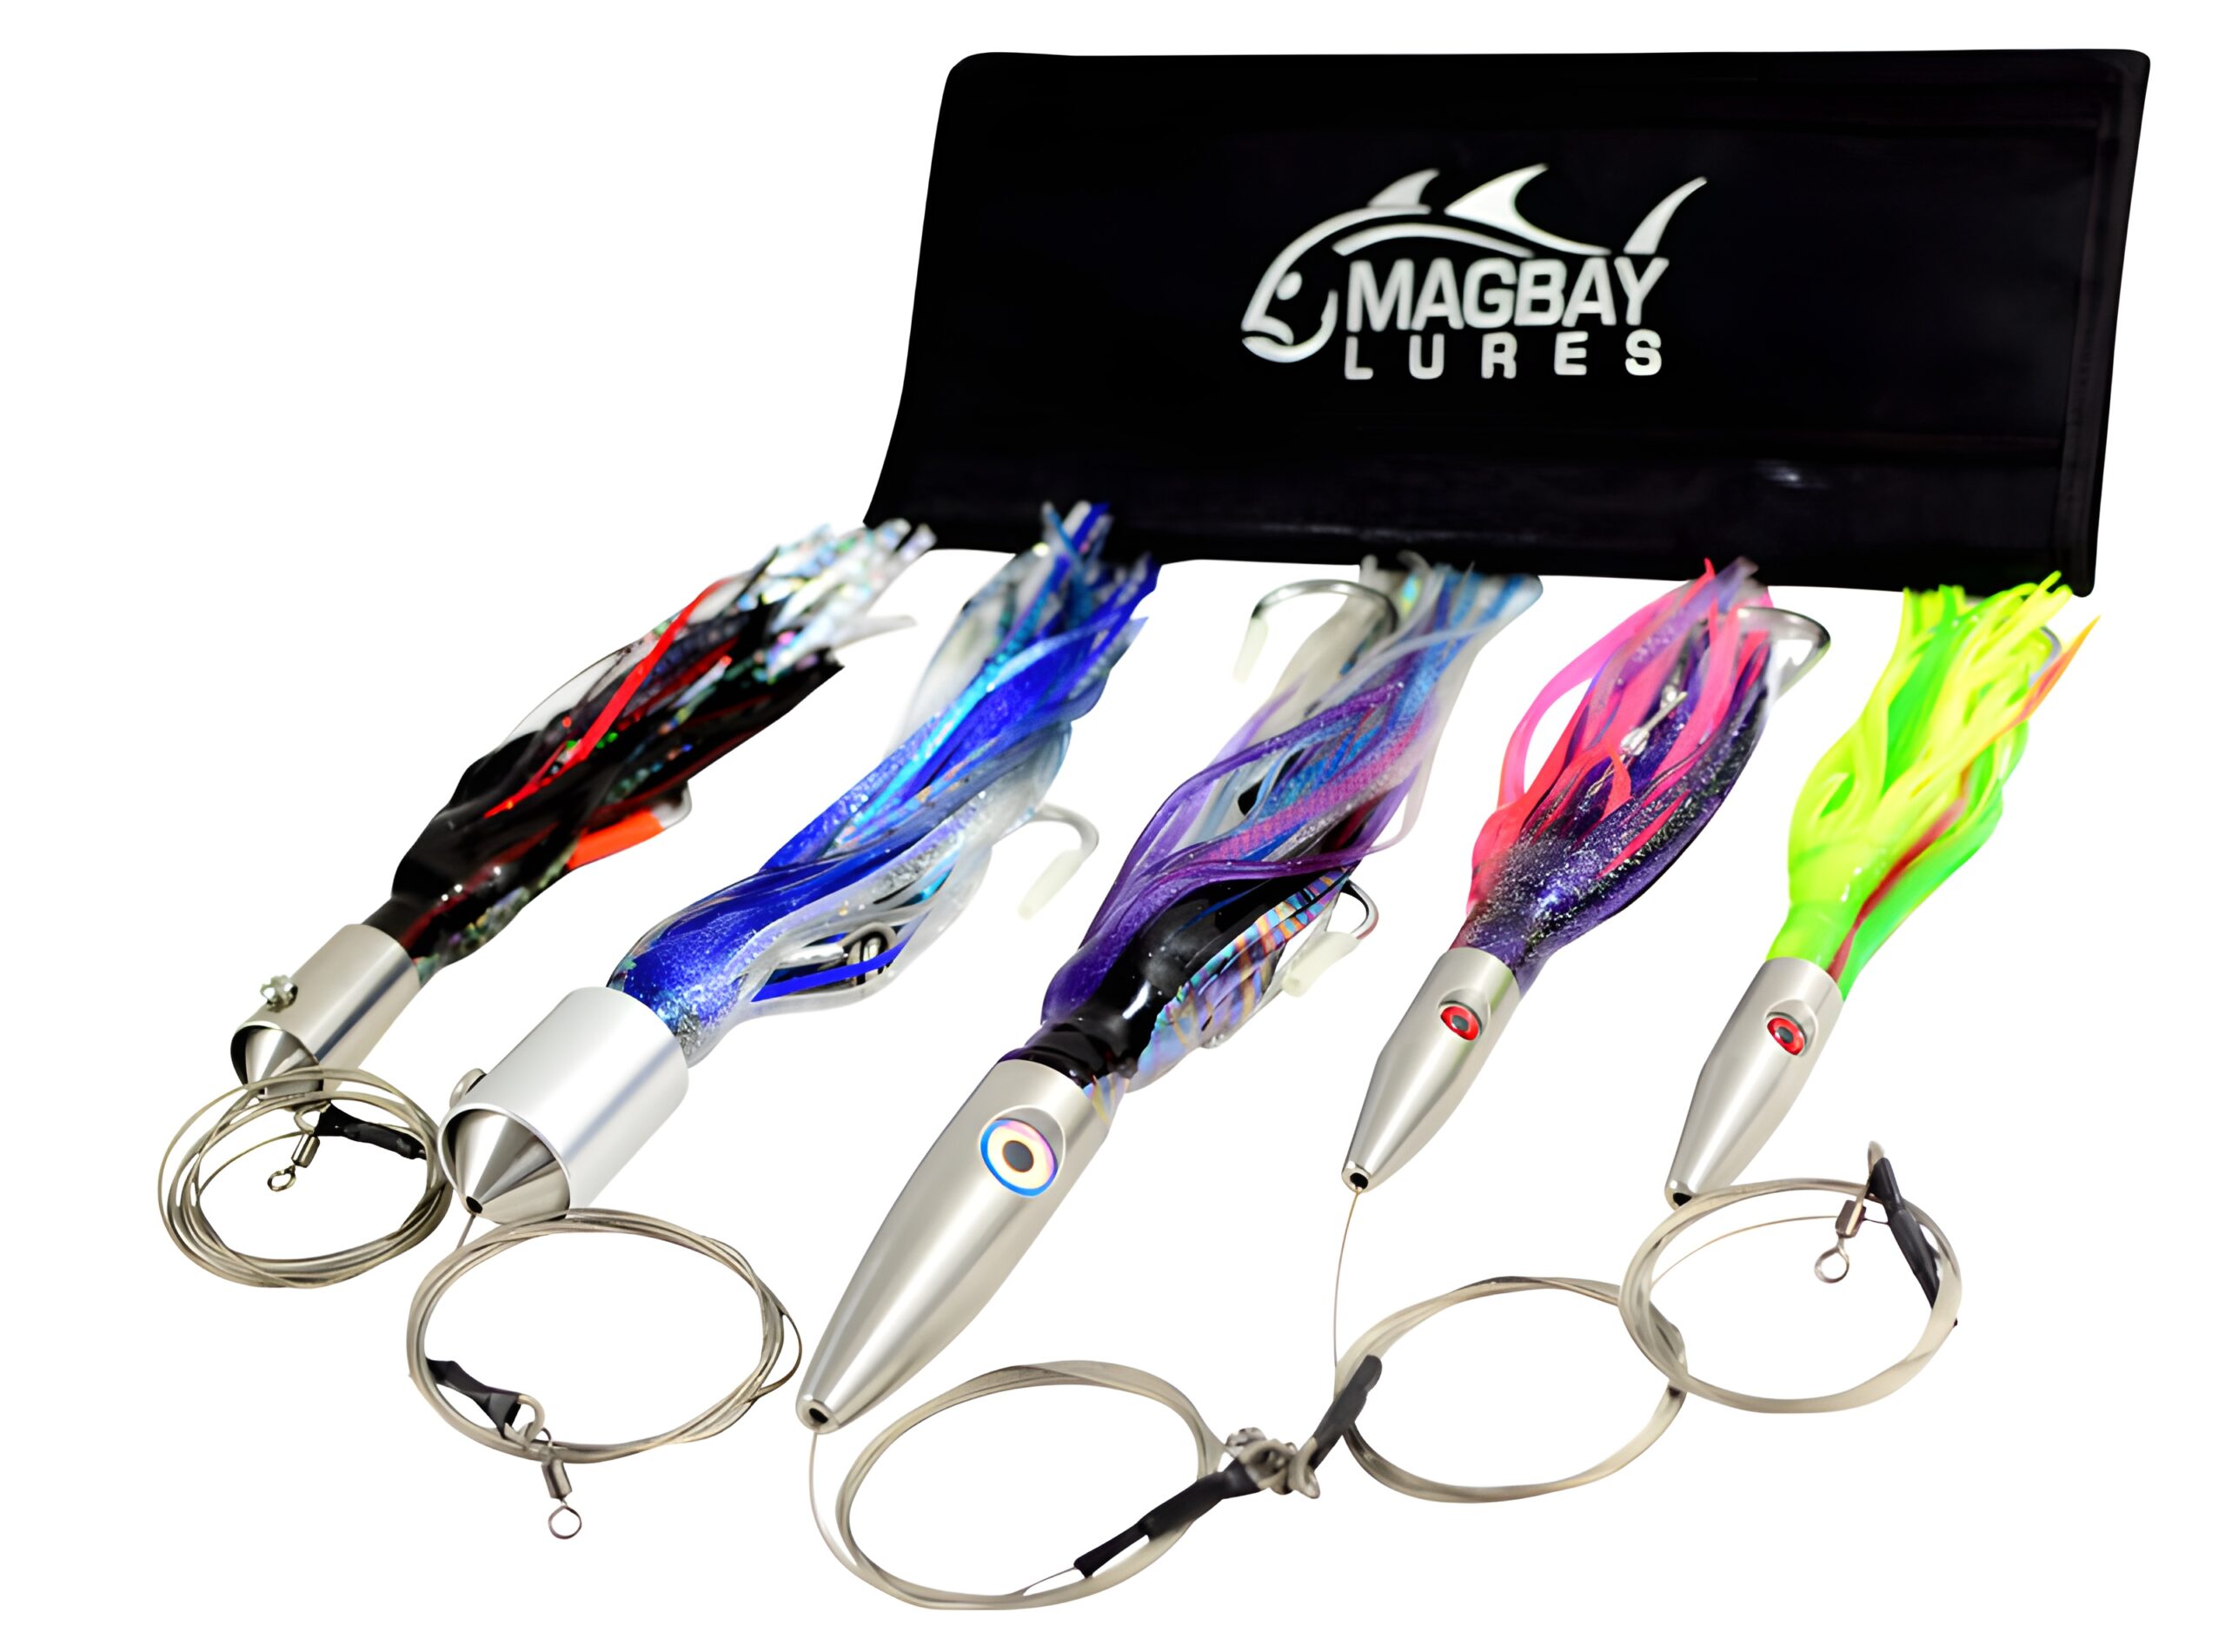 Bost Lures Wahoo Heavy Tackle Trolling Lure Pack, Diving Lures -   Canada